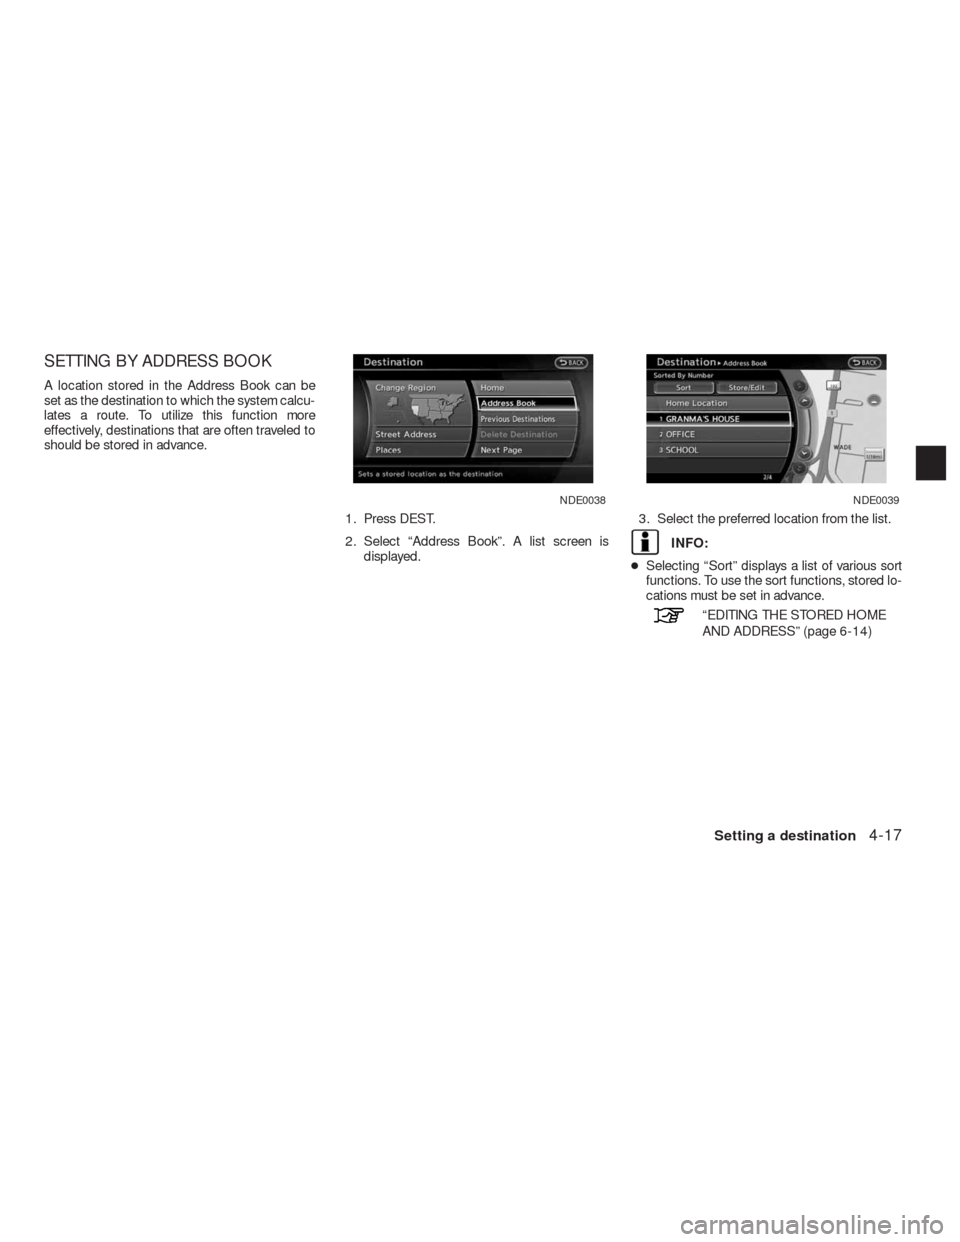 NISSAN ALTIMA COUPE 2010 D32 / 4.G Navigation Manual SETTING BY ADDRESS BOOK
A location stored in the Address Book can be
set as the destination to which the system calcu-
lates a route. To utilize this function more
effectively, destinations that are o